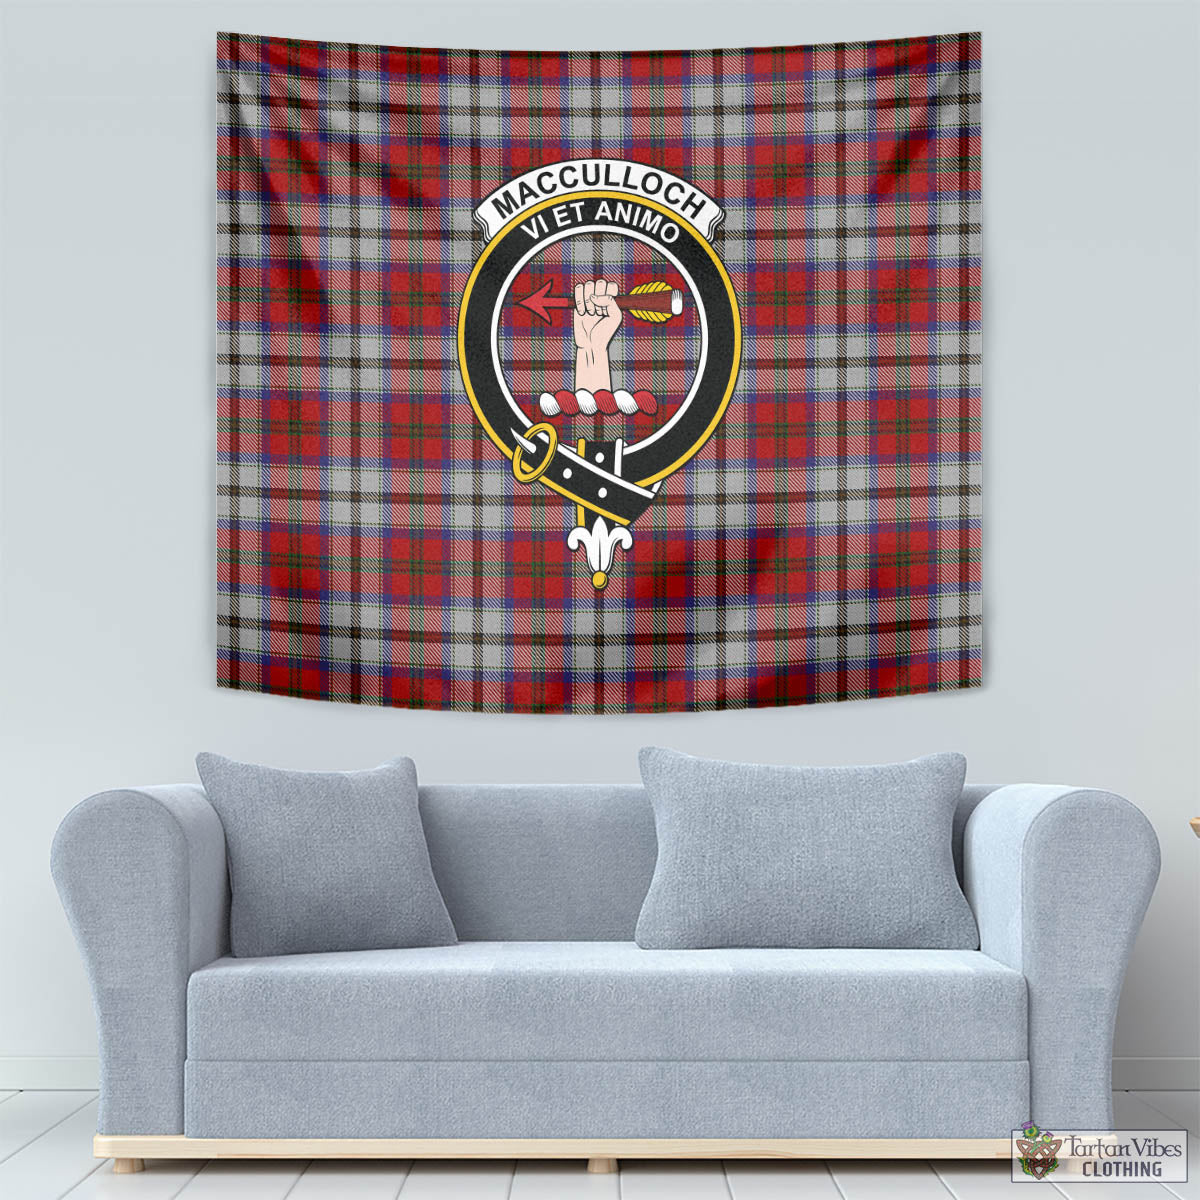 Tartan Vibes Clothing MacCulloch Dress Tartan Tapestry Wall Hanging and Home Decor for Room with Family Crest